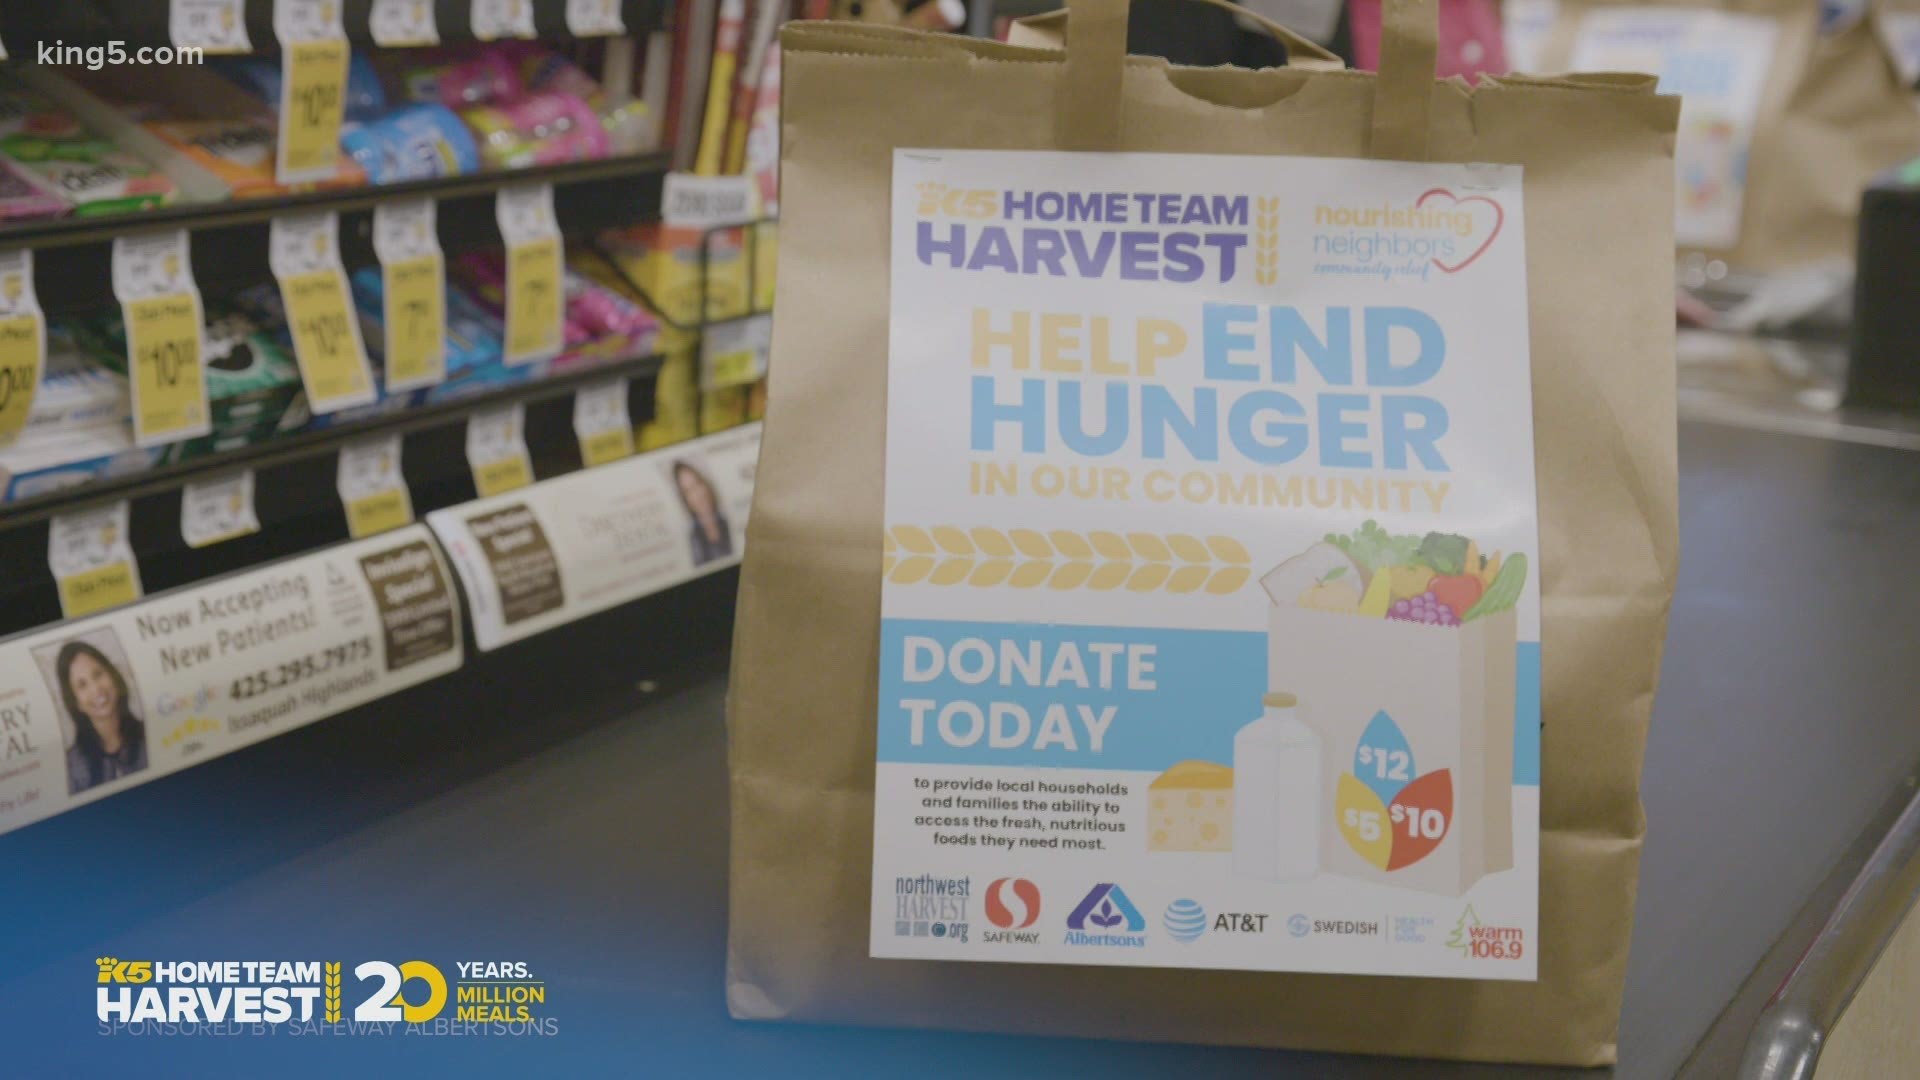 It's the 20th year for Home Team Harvest, a community effort to raise 20 million meals for Northwest Harvest. Sponsored by Safeway and Albertsons